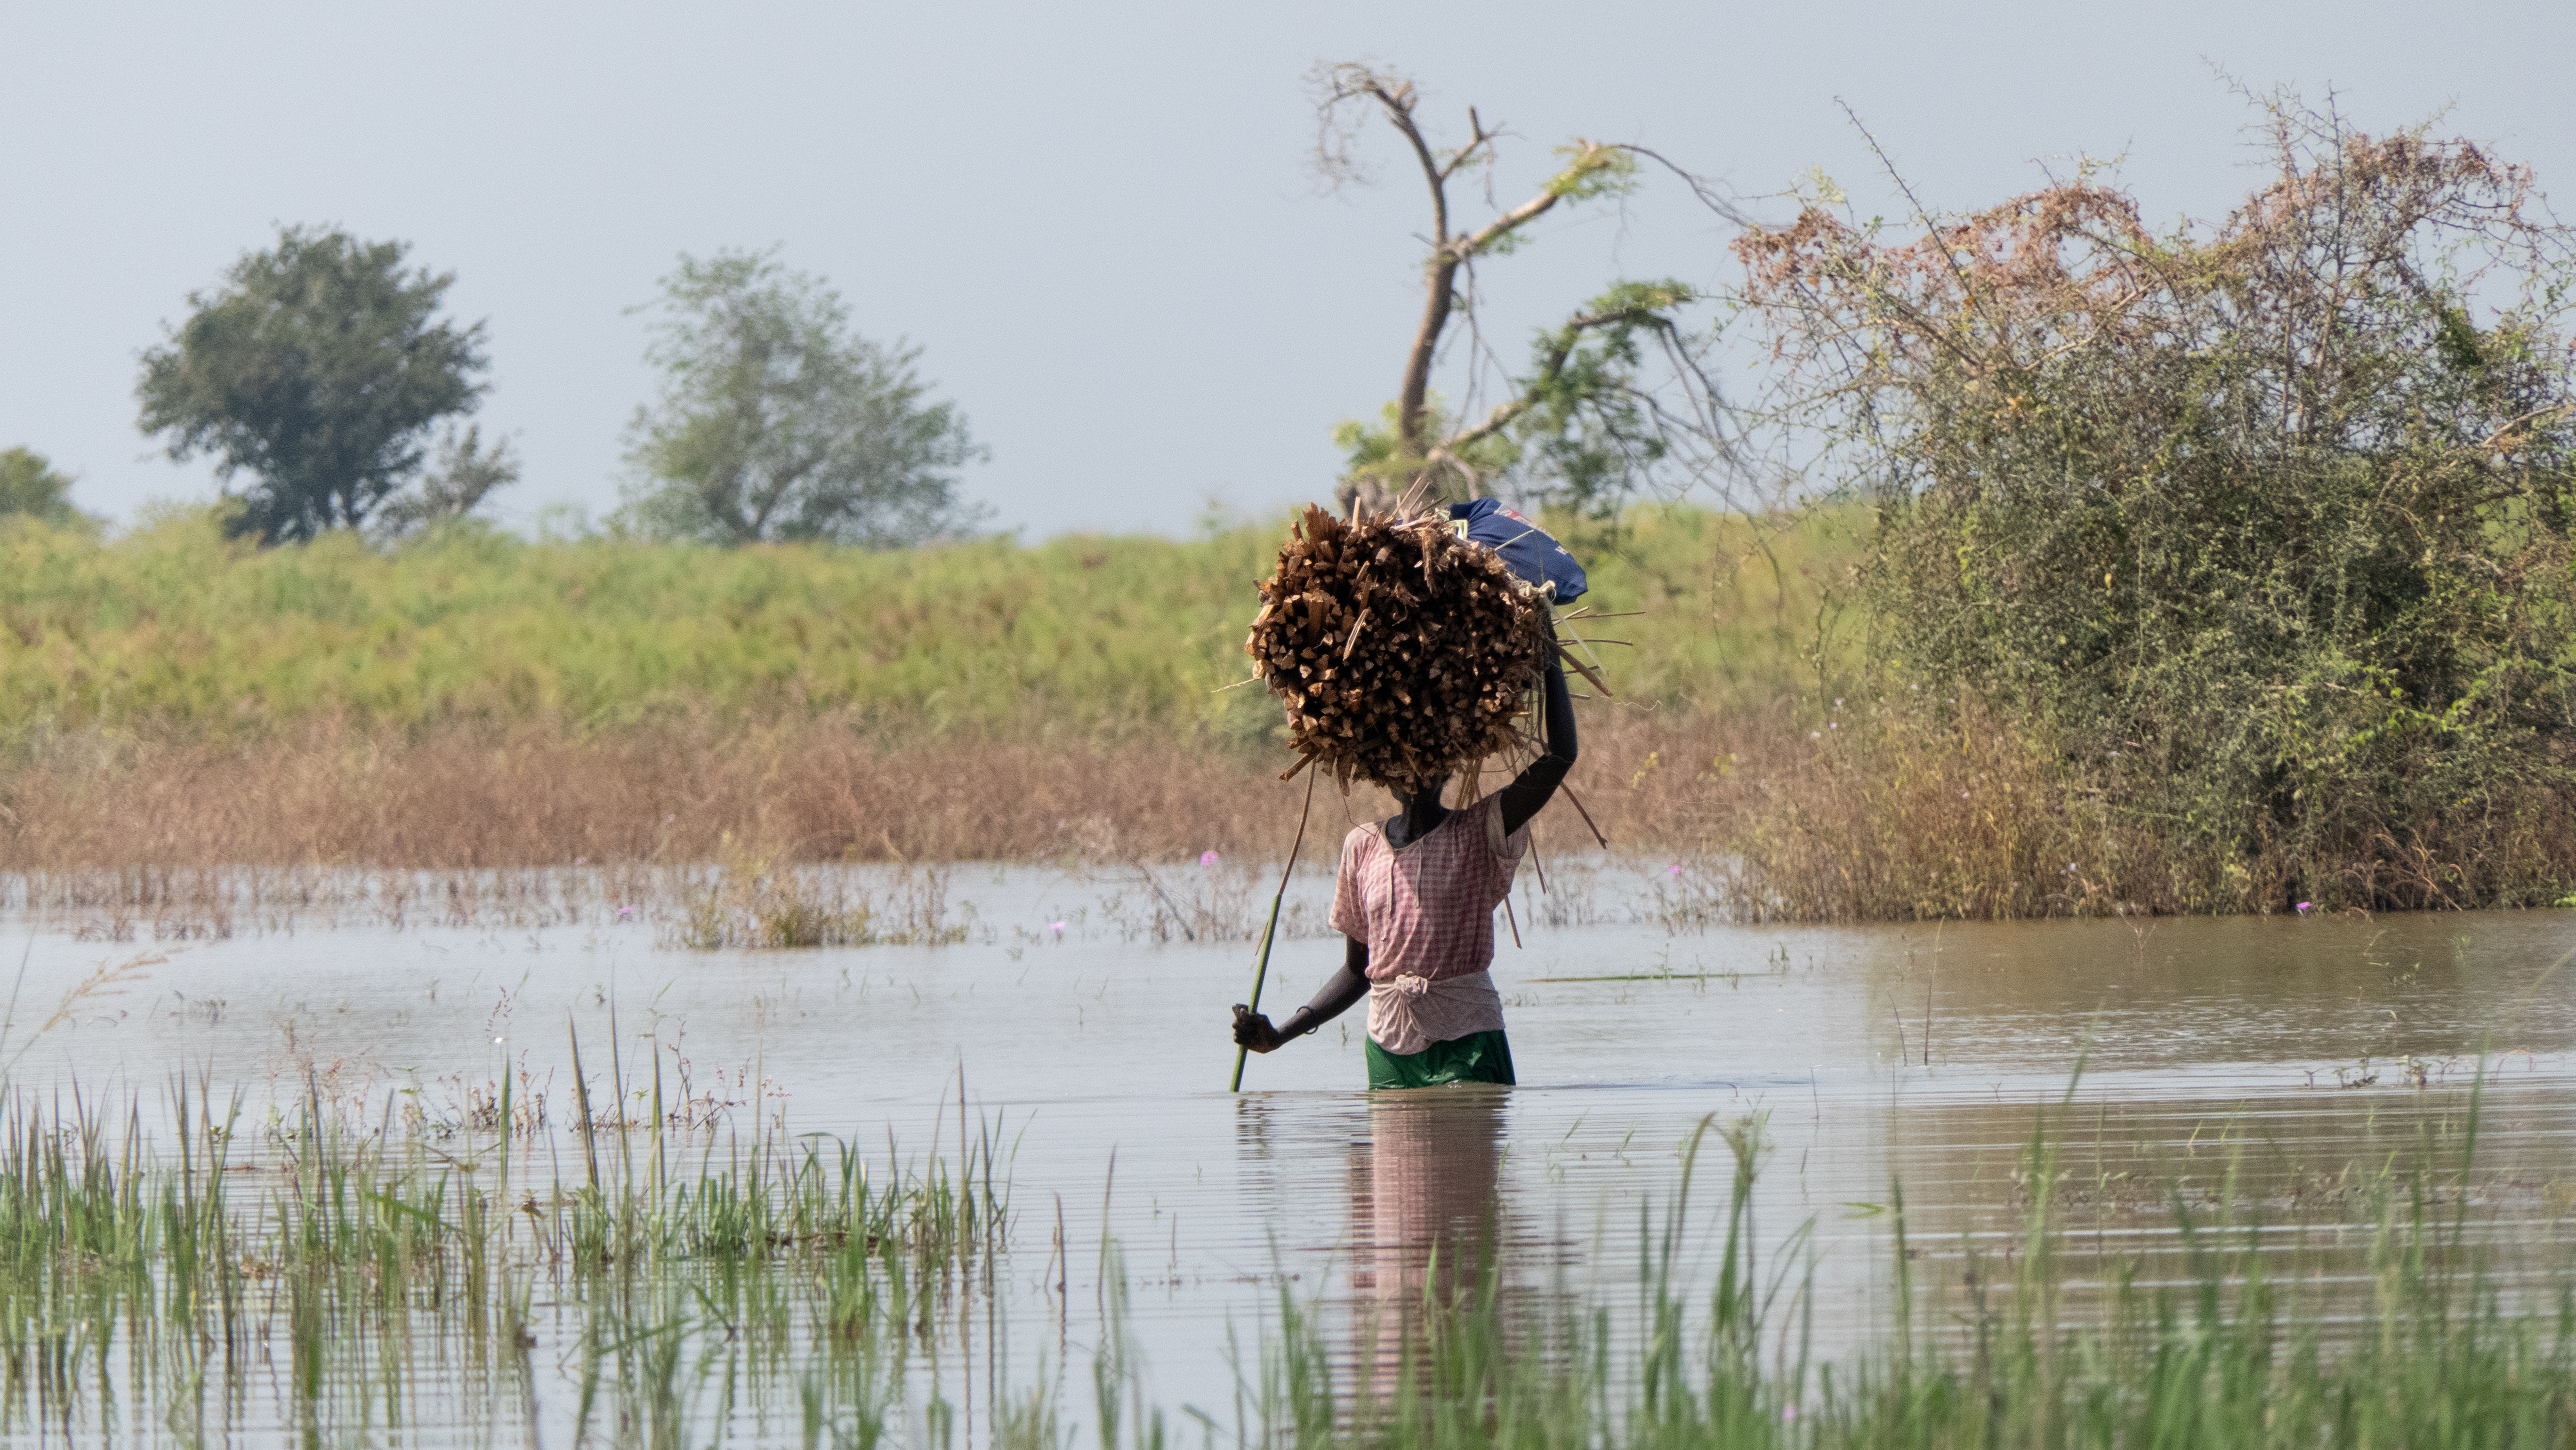 A South Sudanese woman carries firewood as she wades through flood waters in Rubkona